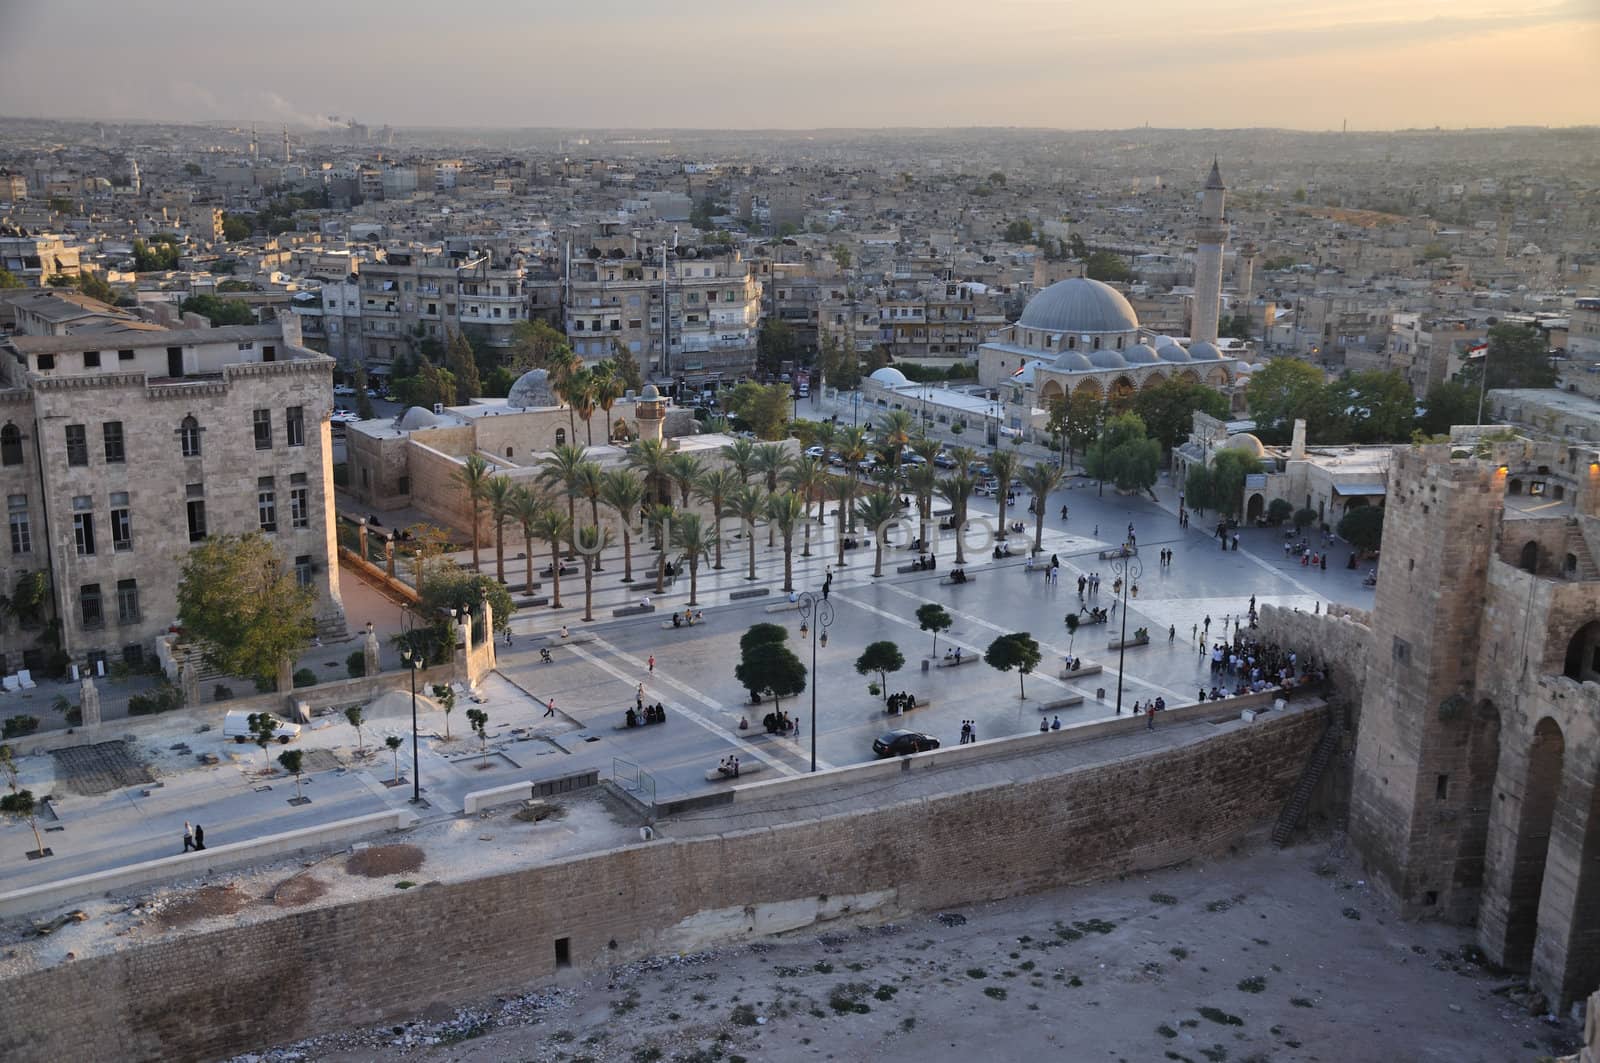 This is view from Aleppo's citadel towards to Ummayadd (Great) Mosque.